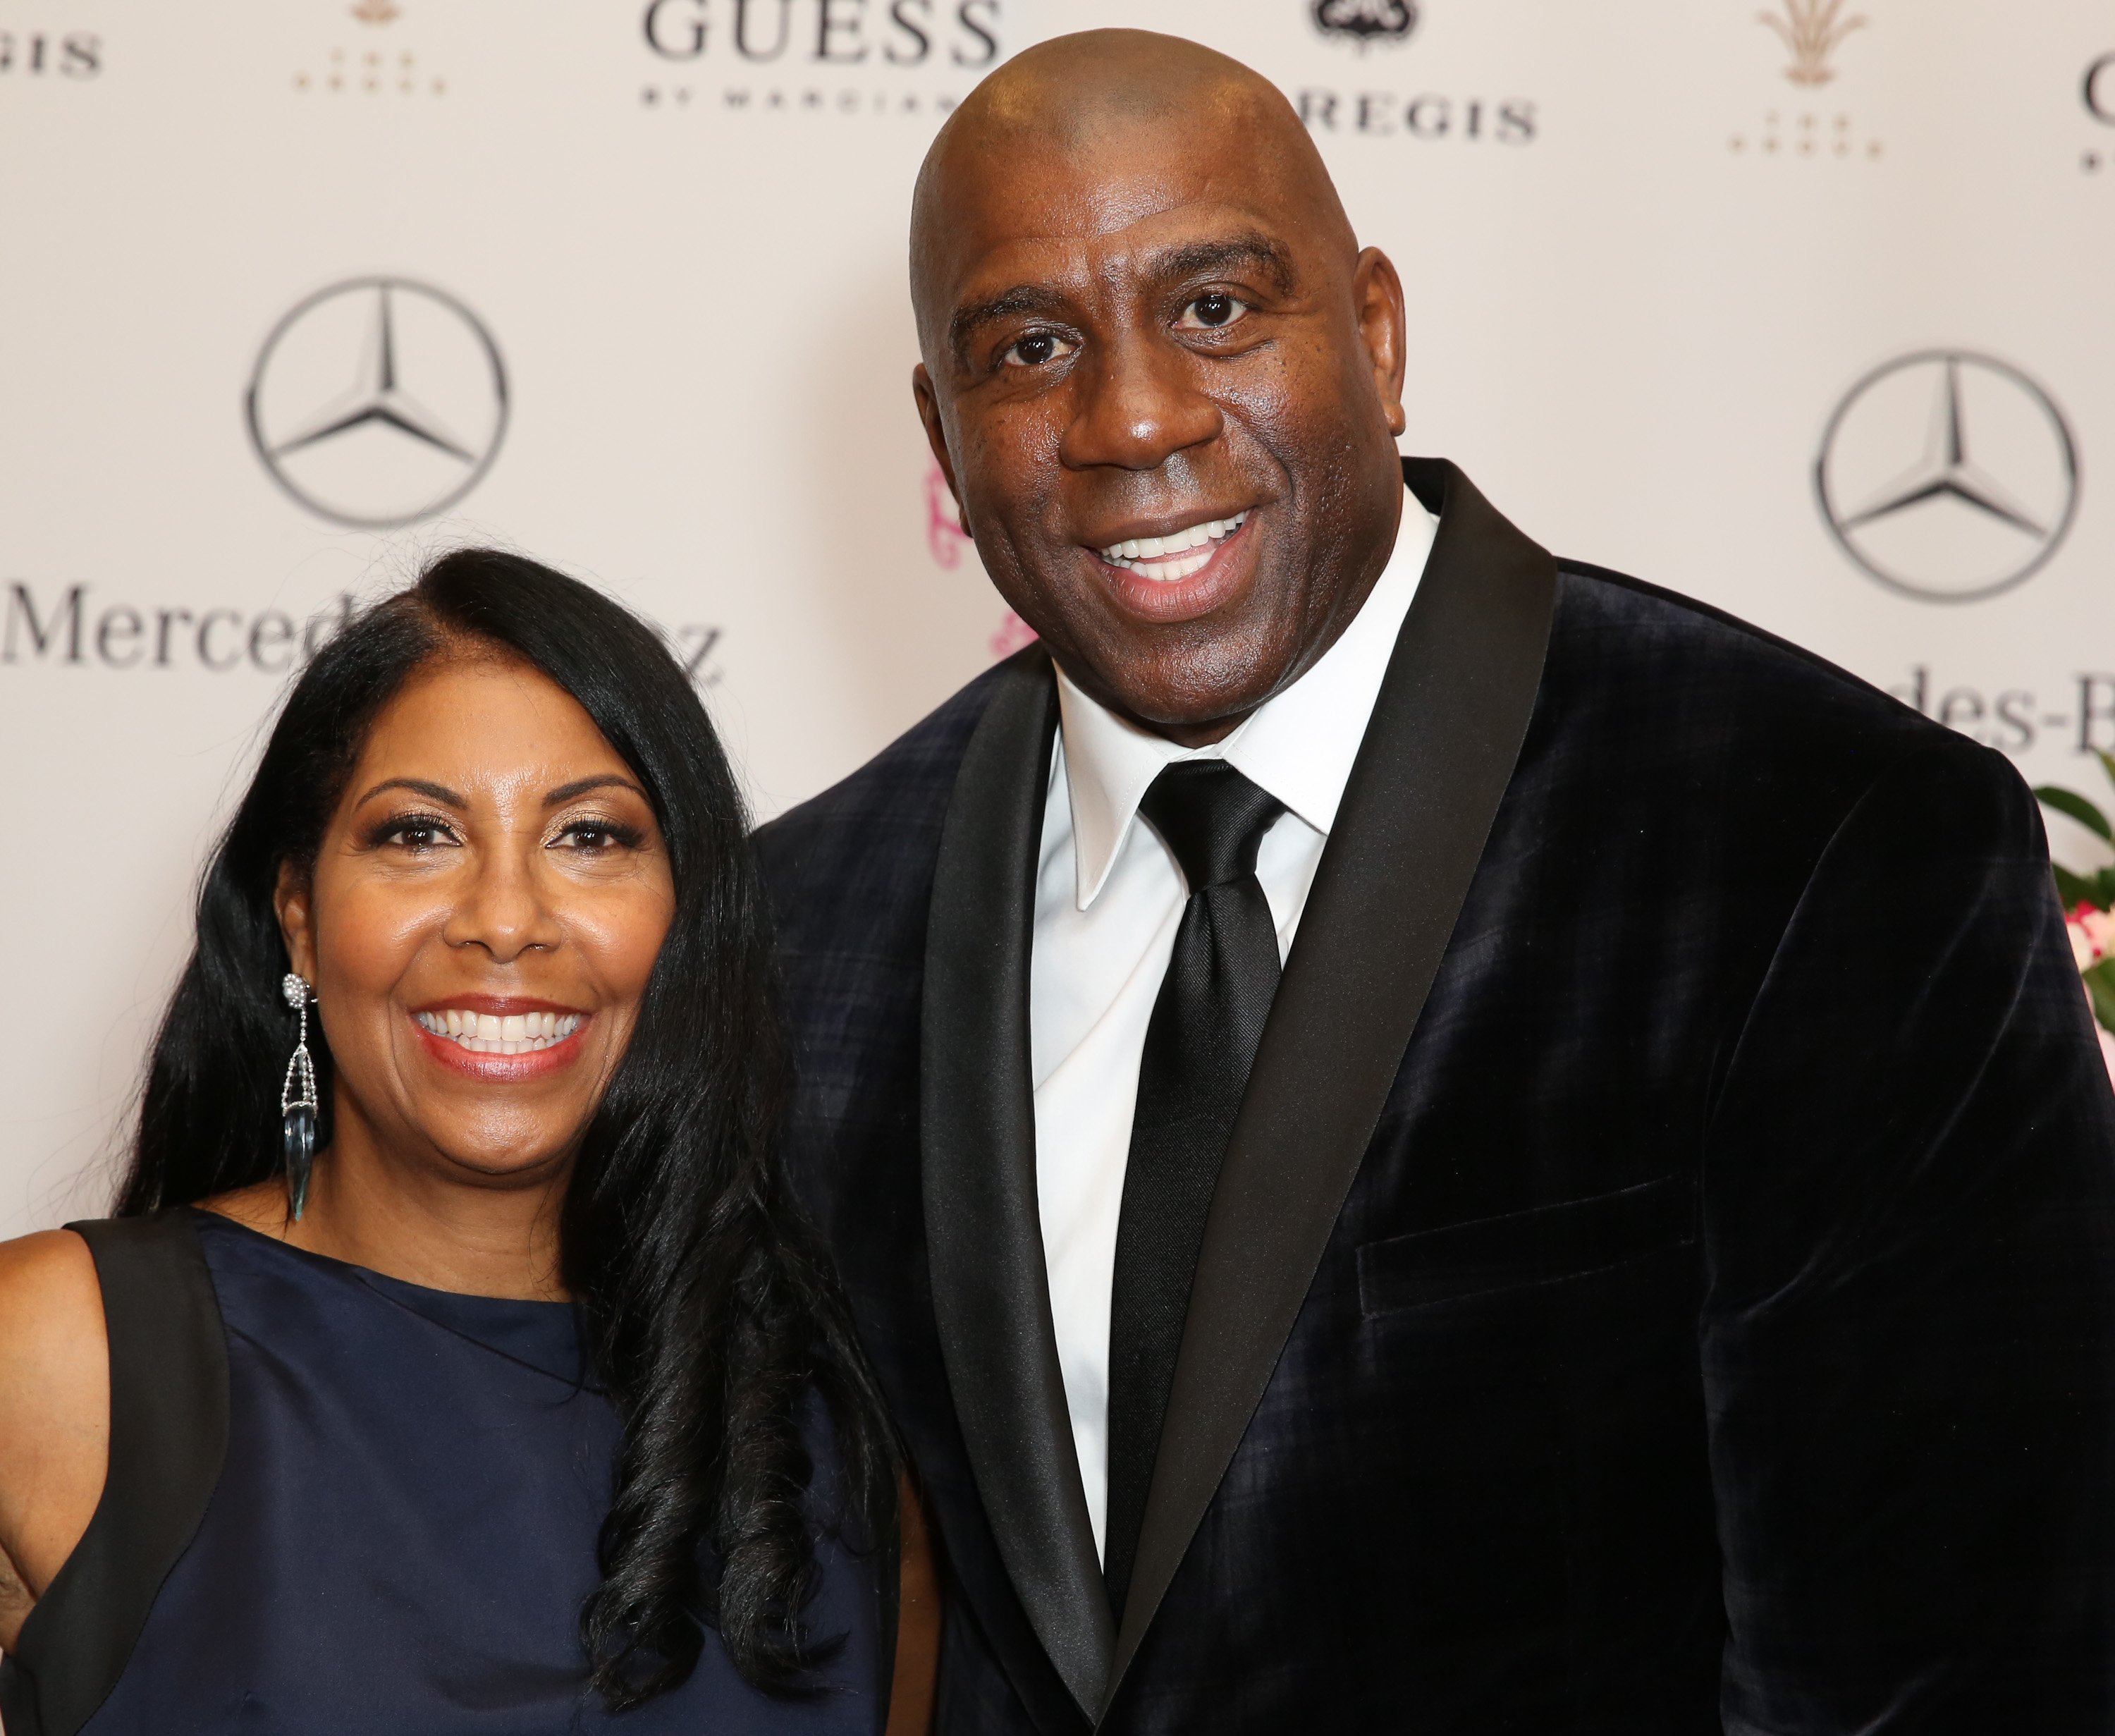 Cookie and Earvin 'Magic' Johnson pictured at the Carousel of Hope Ball on October 11, 2014 in Beverly Hills, California. | Source: Getty Images